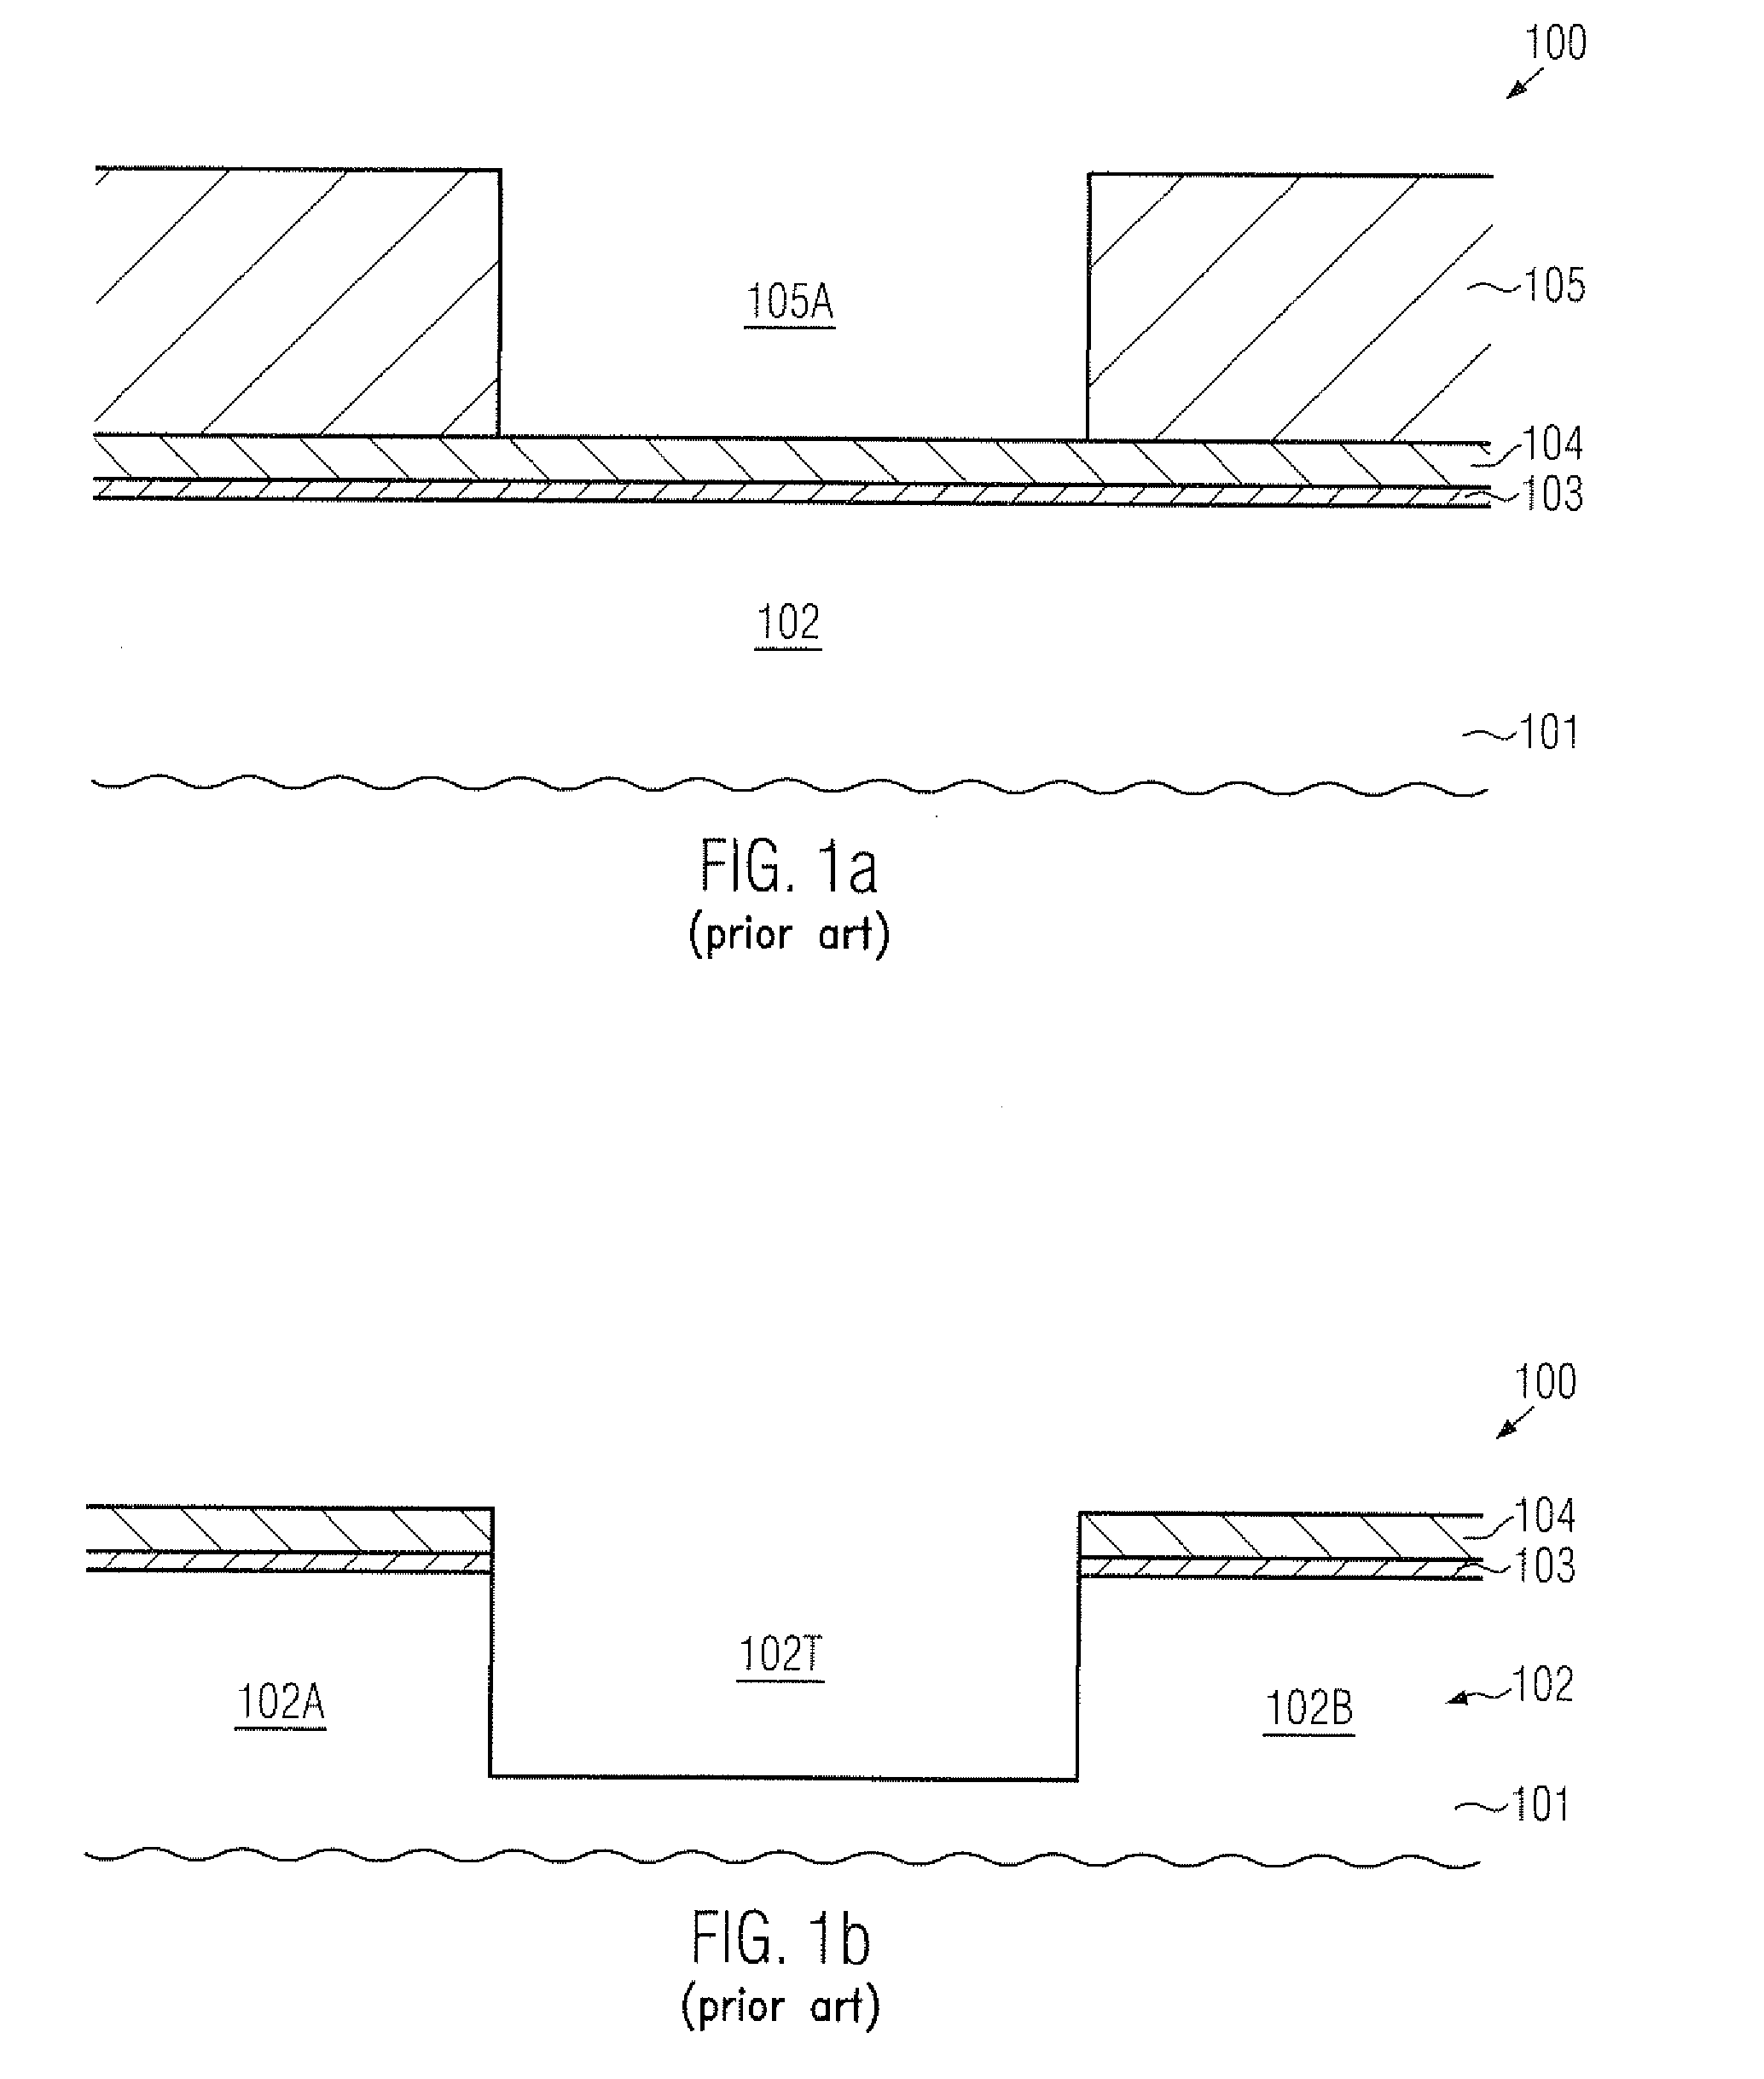 Buried etch stop layer in trench isolation structures for superior surface planarity in densely packed semiconductor devices